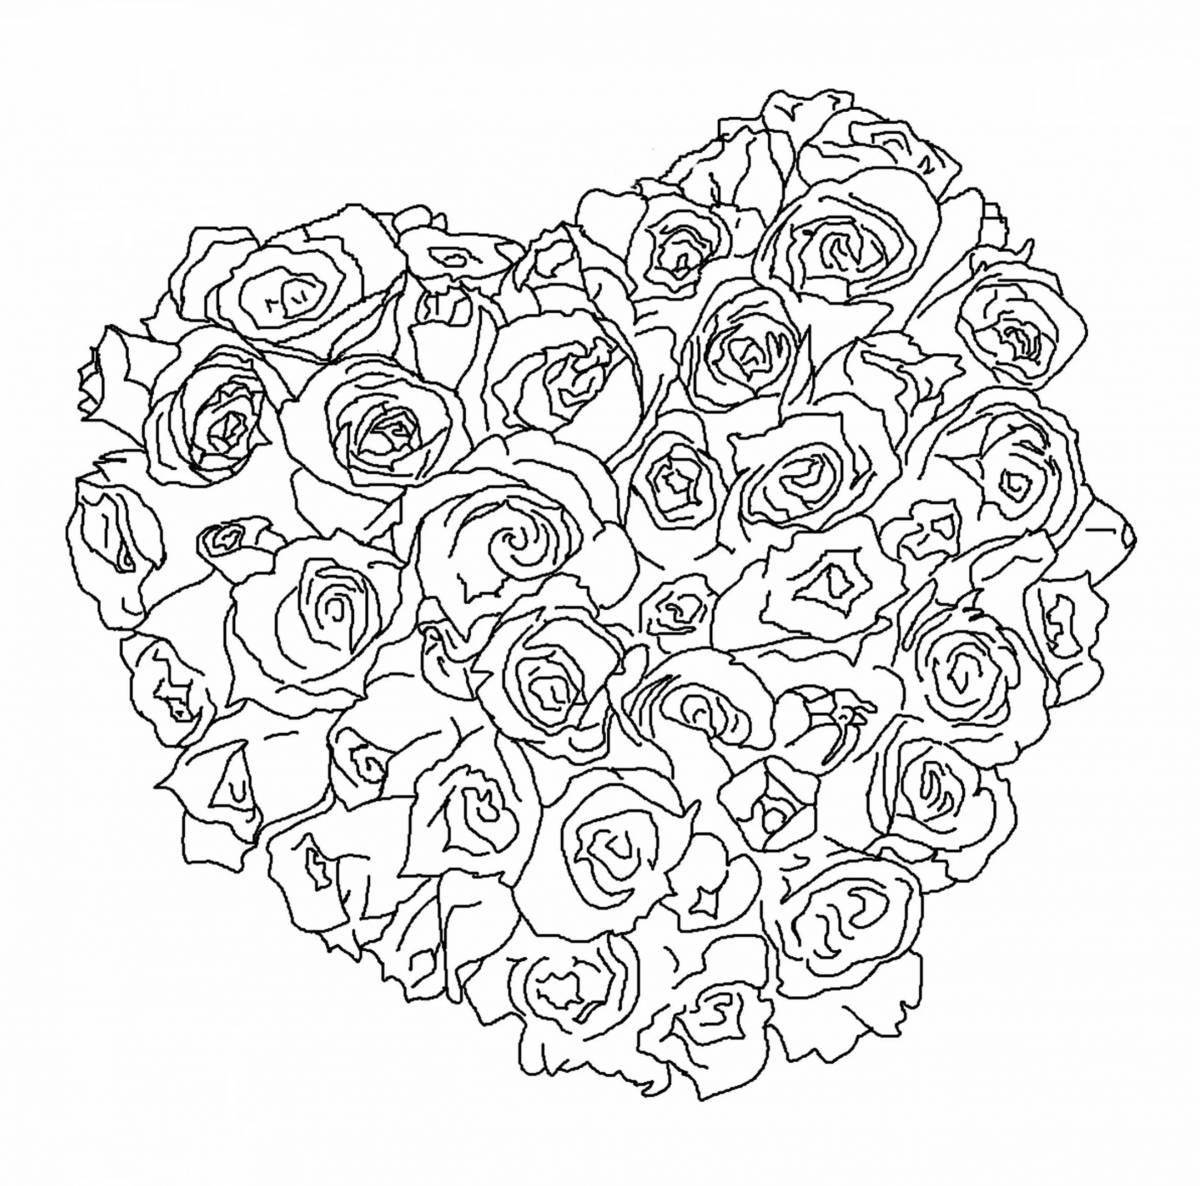 Sensational happy birthday coloring book with roses